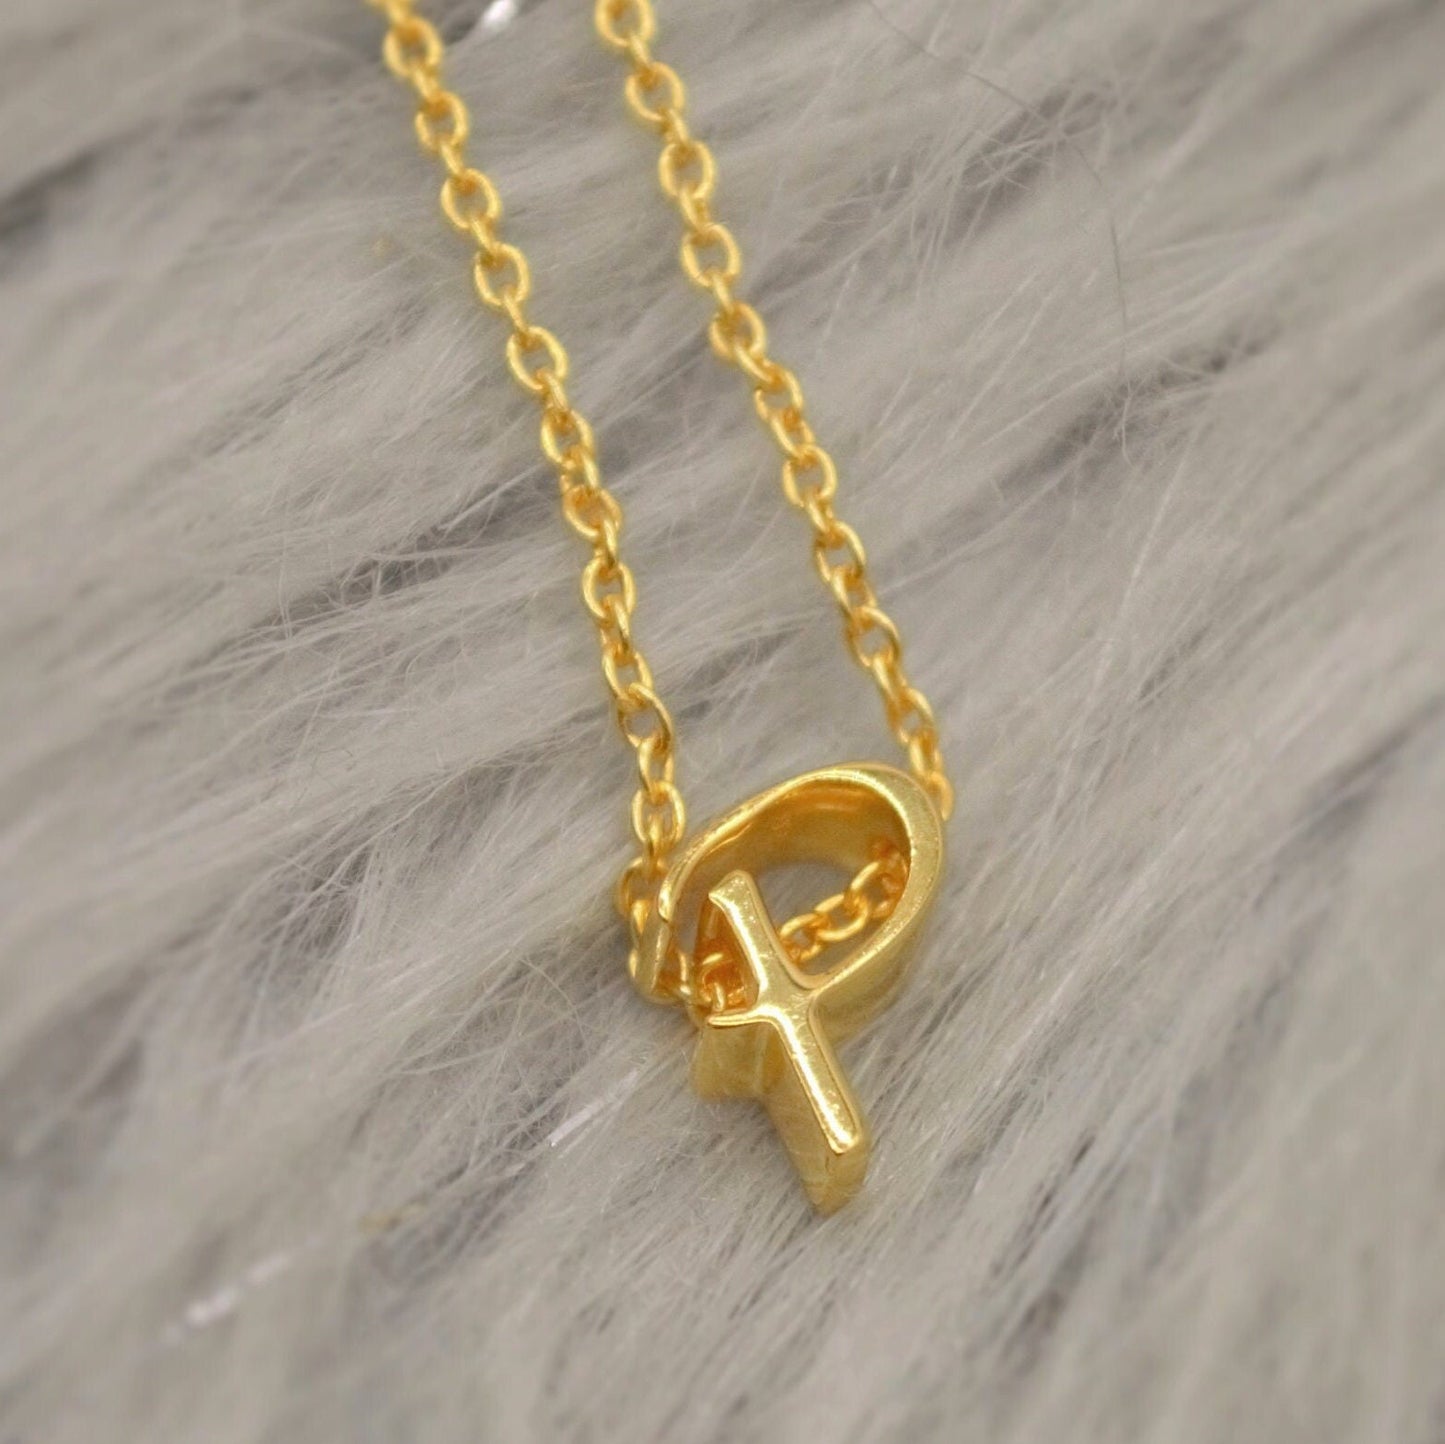 Gold Initial Birthstone Necklace, Chain Pendant Necklace, Custom Initial Letter Charm Pendant, Alphabet Letter, Initial Birthstone Jewelry